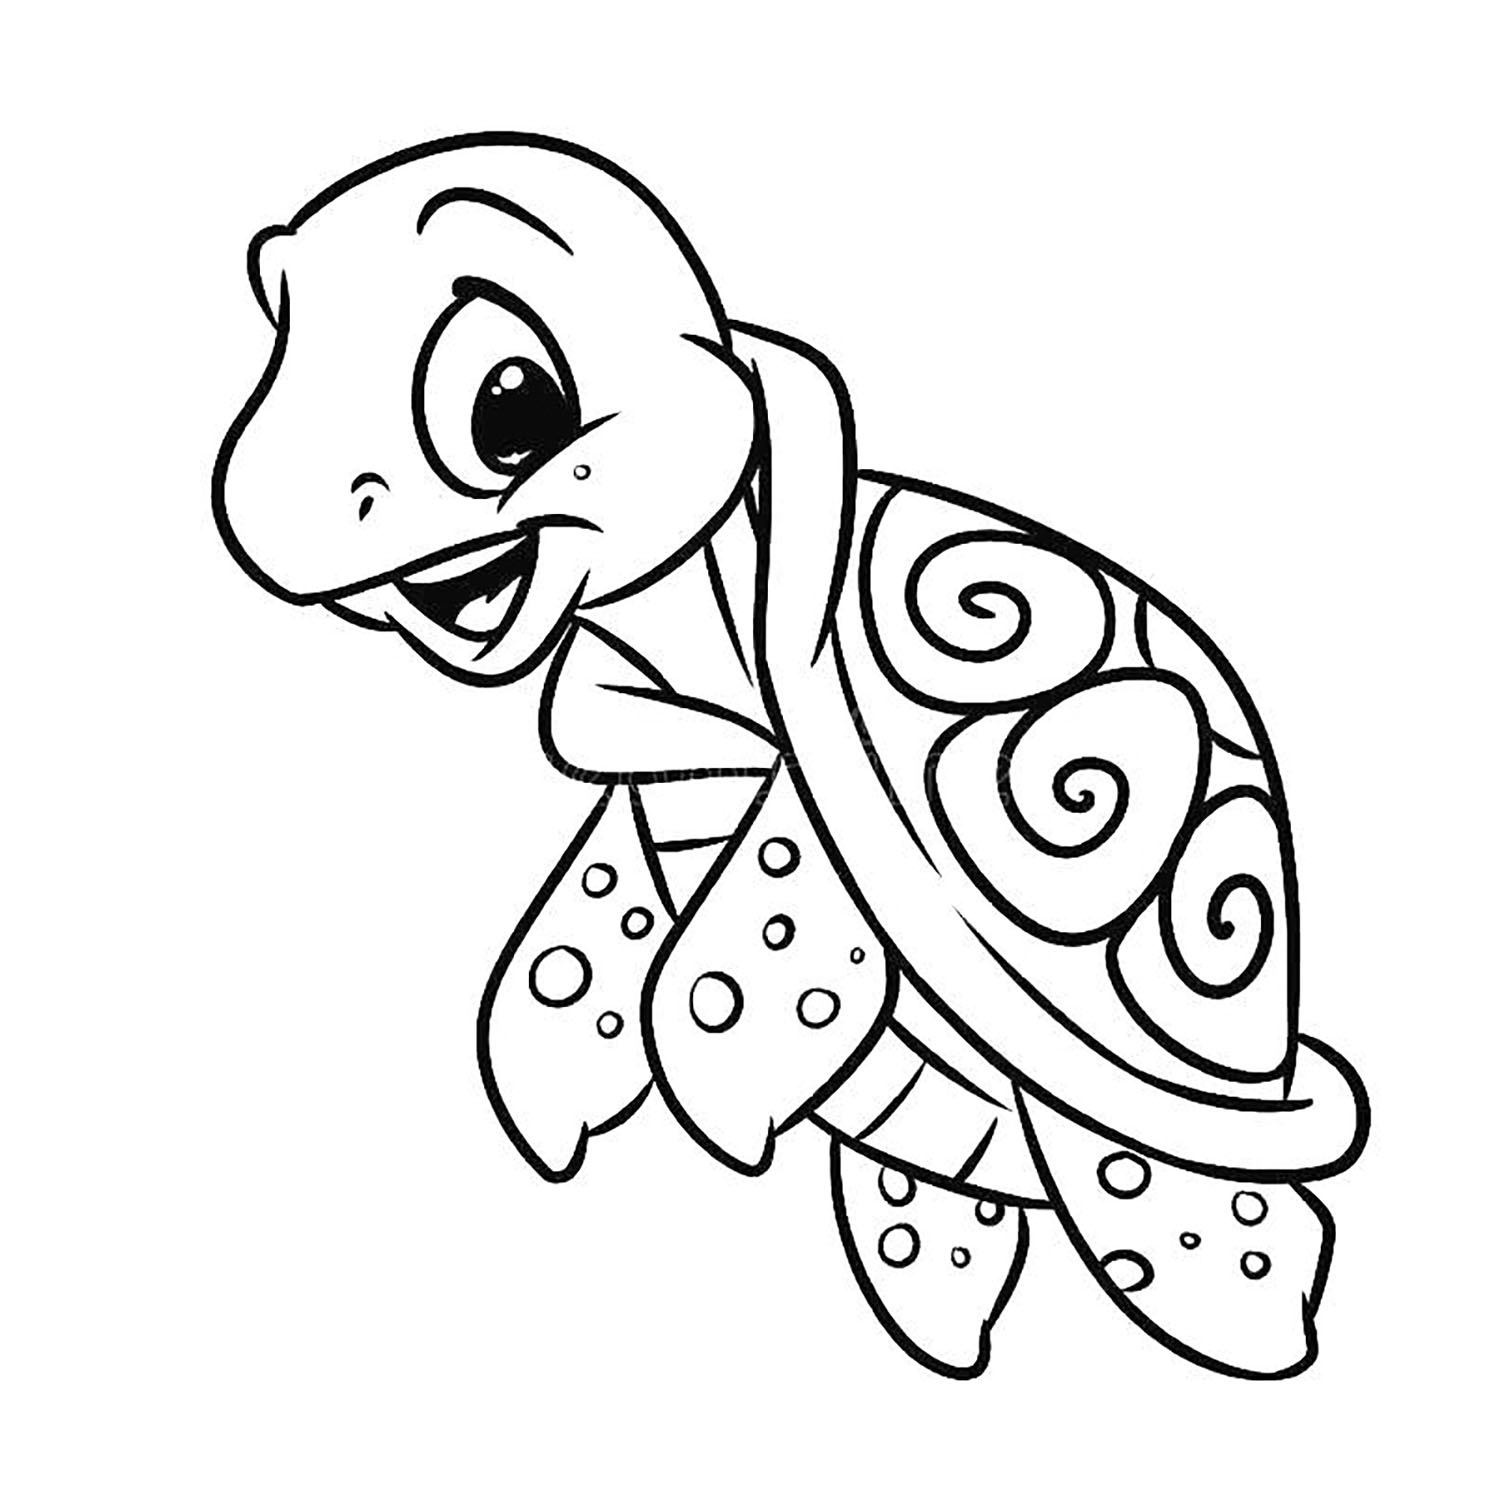 Download Turtles for children - Turtles Kids Coloring Pages